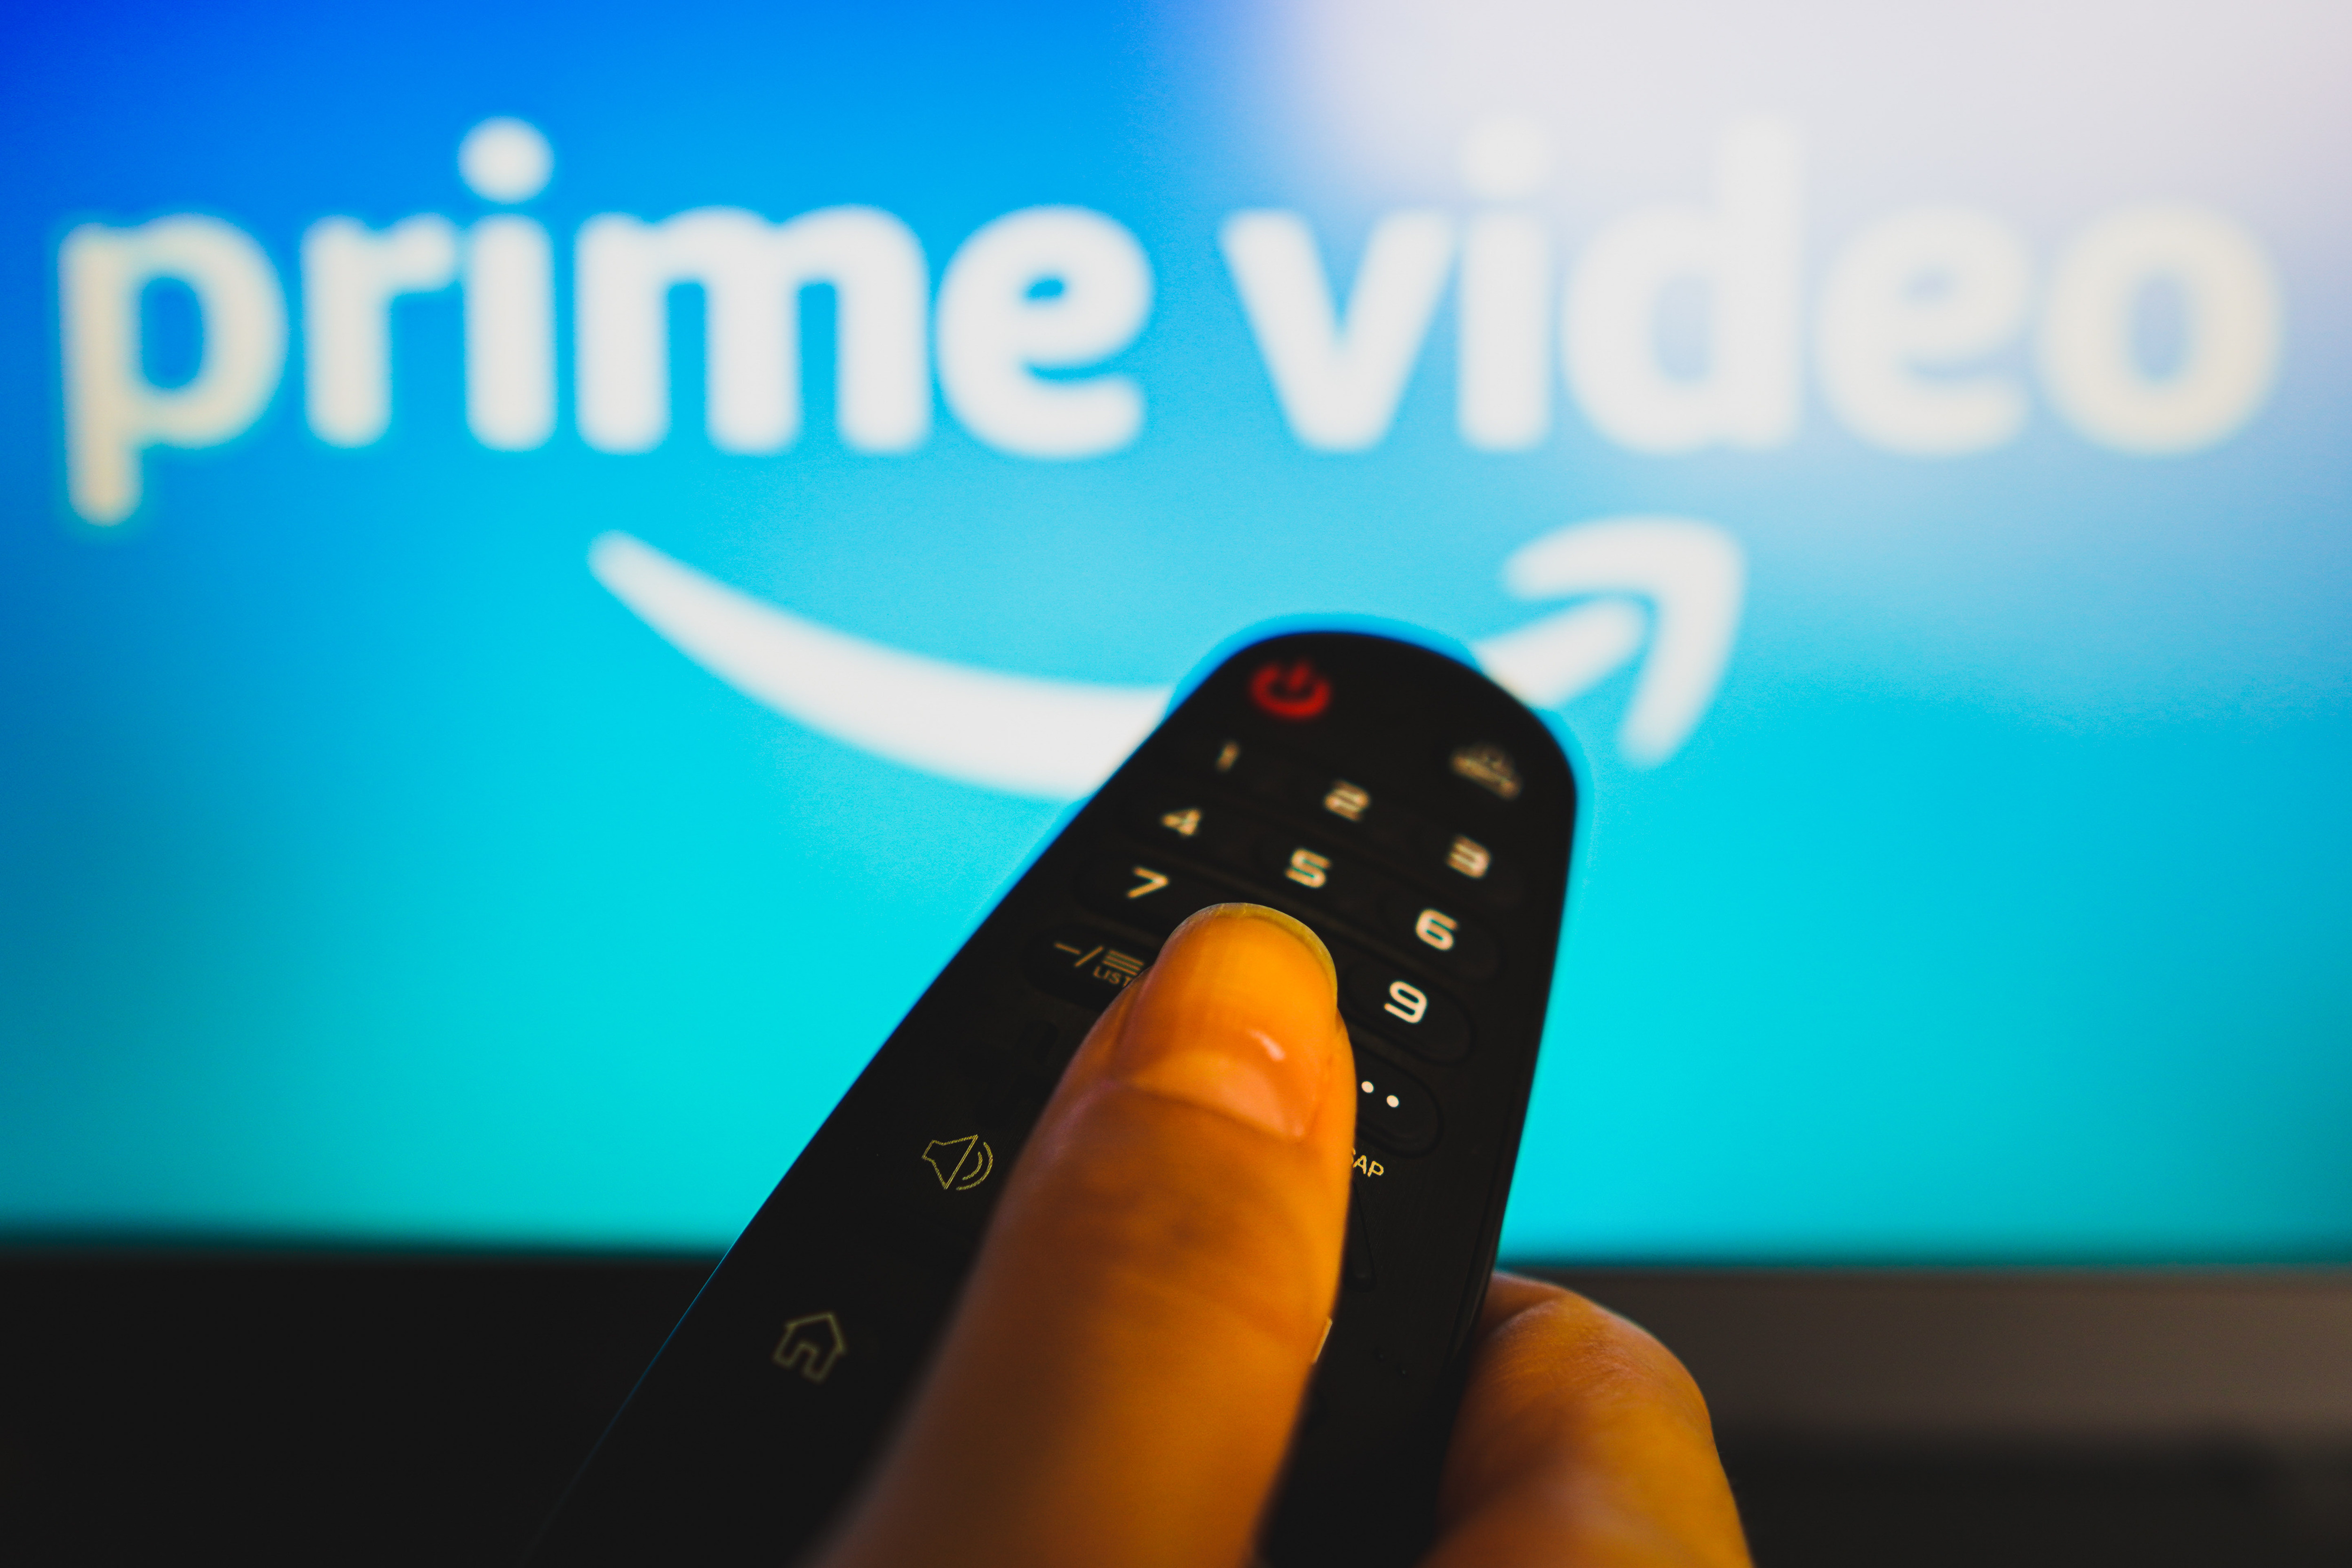 Canadians will soon see commercials on Amazon Prime Video